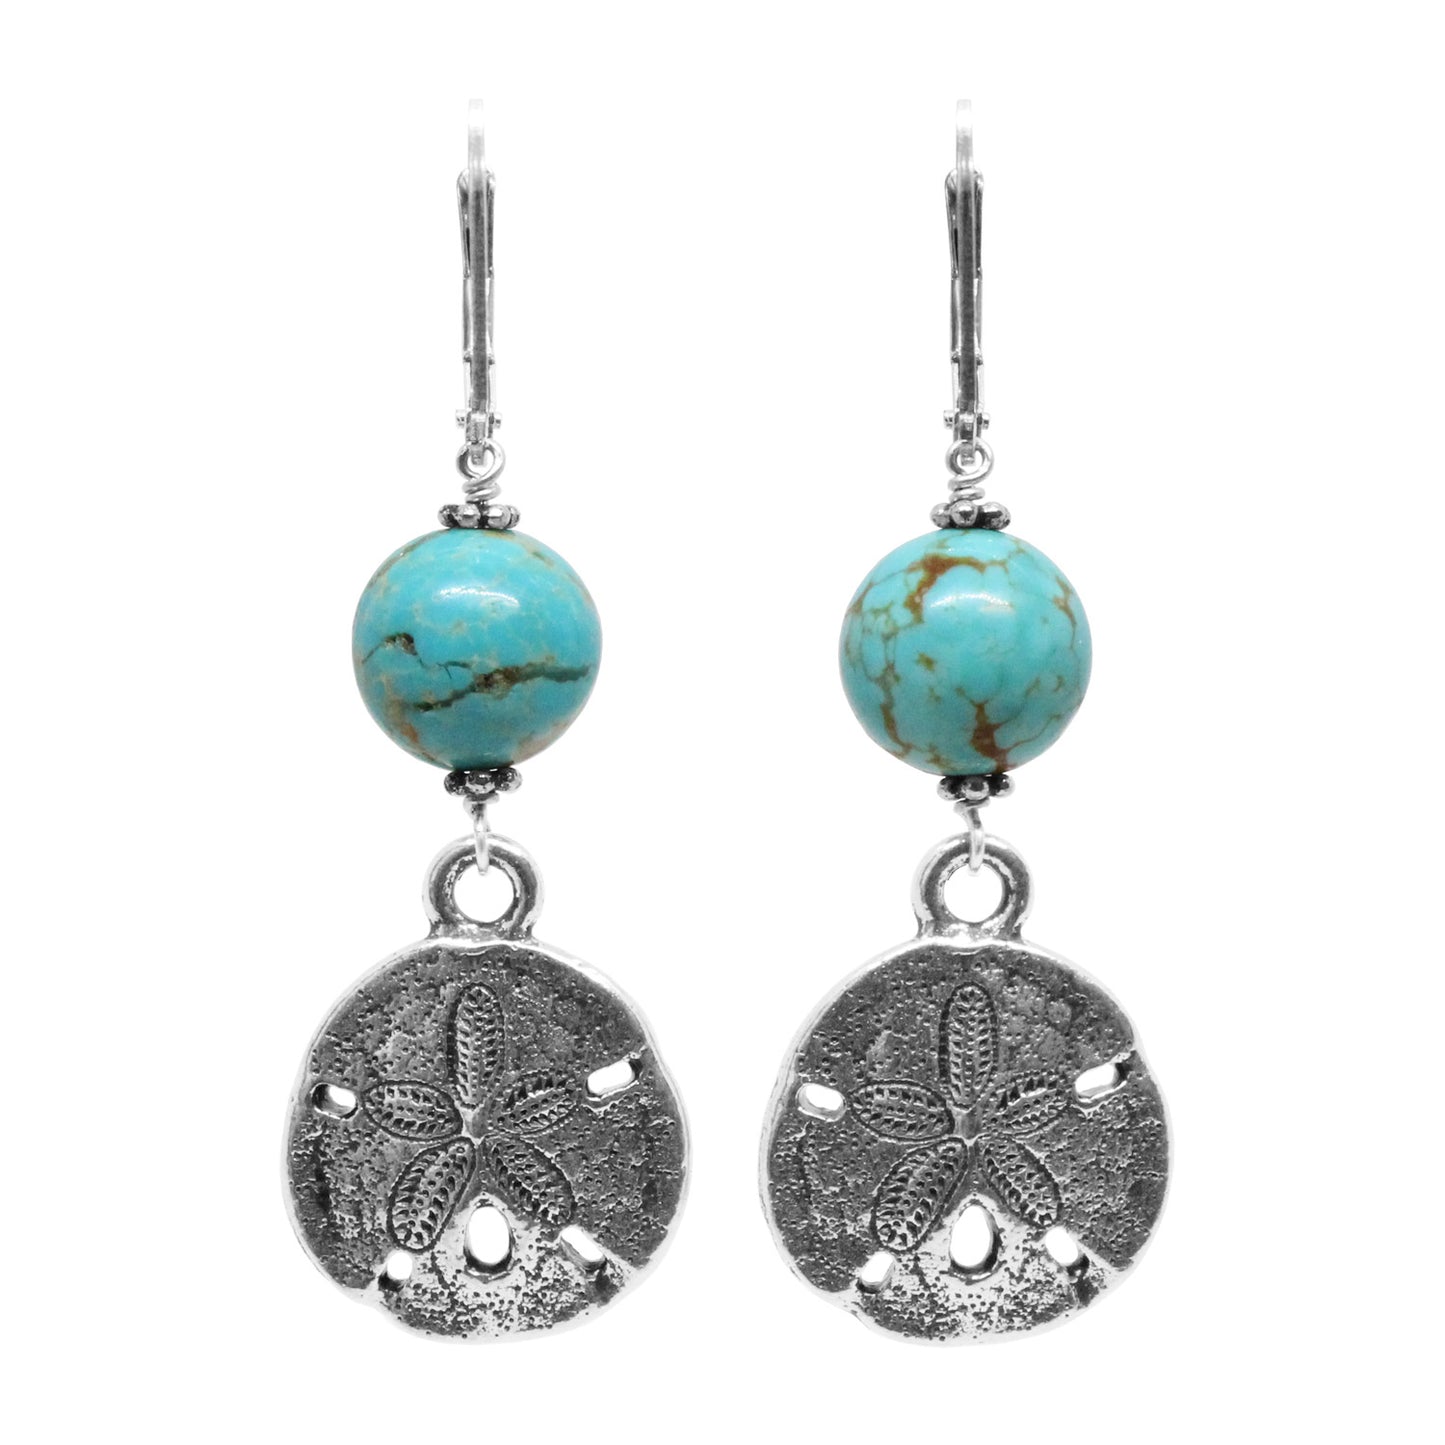 Turquoise Island Sand Dollar Earrings / 50mm length / genuine turquoise gemstones / sterling silver leverback earwires